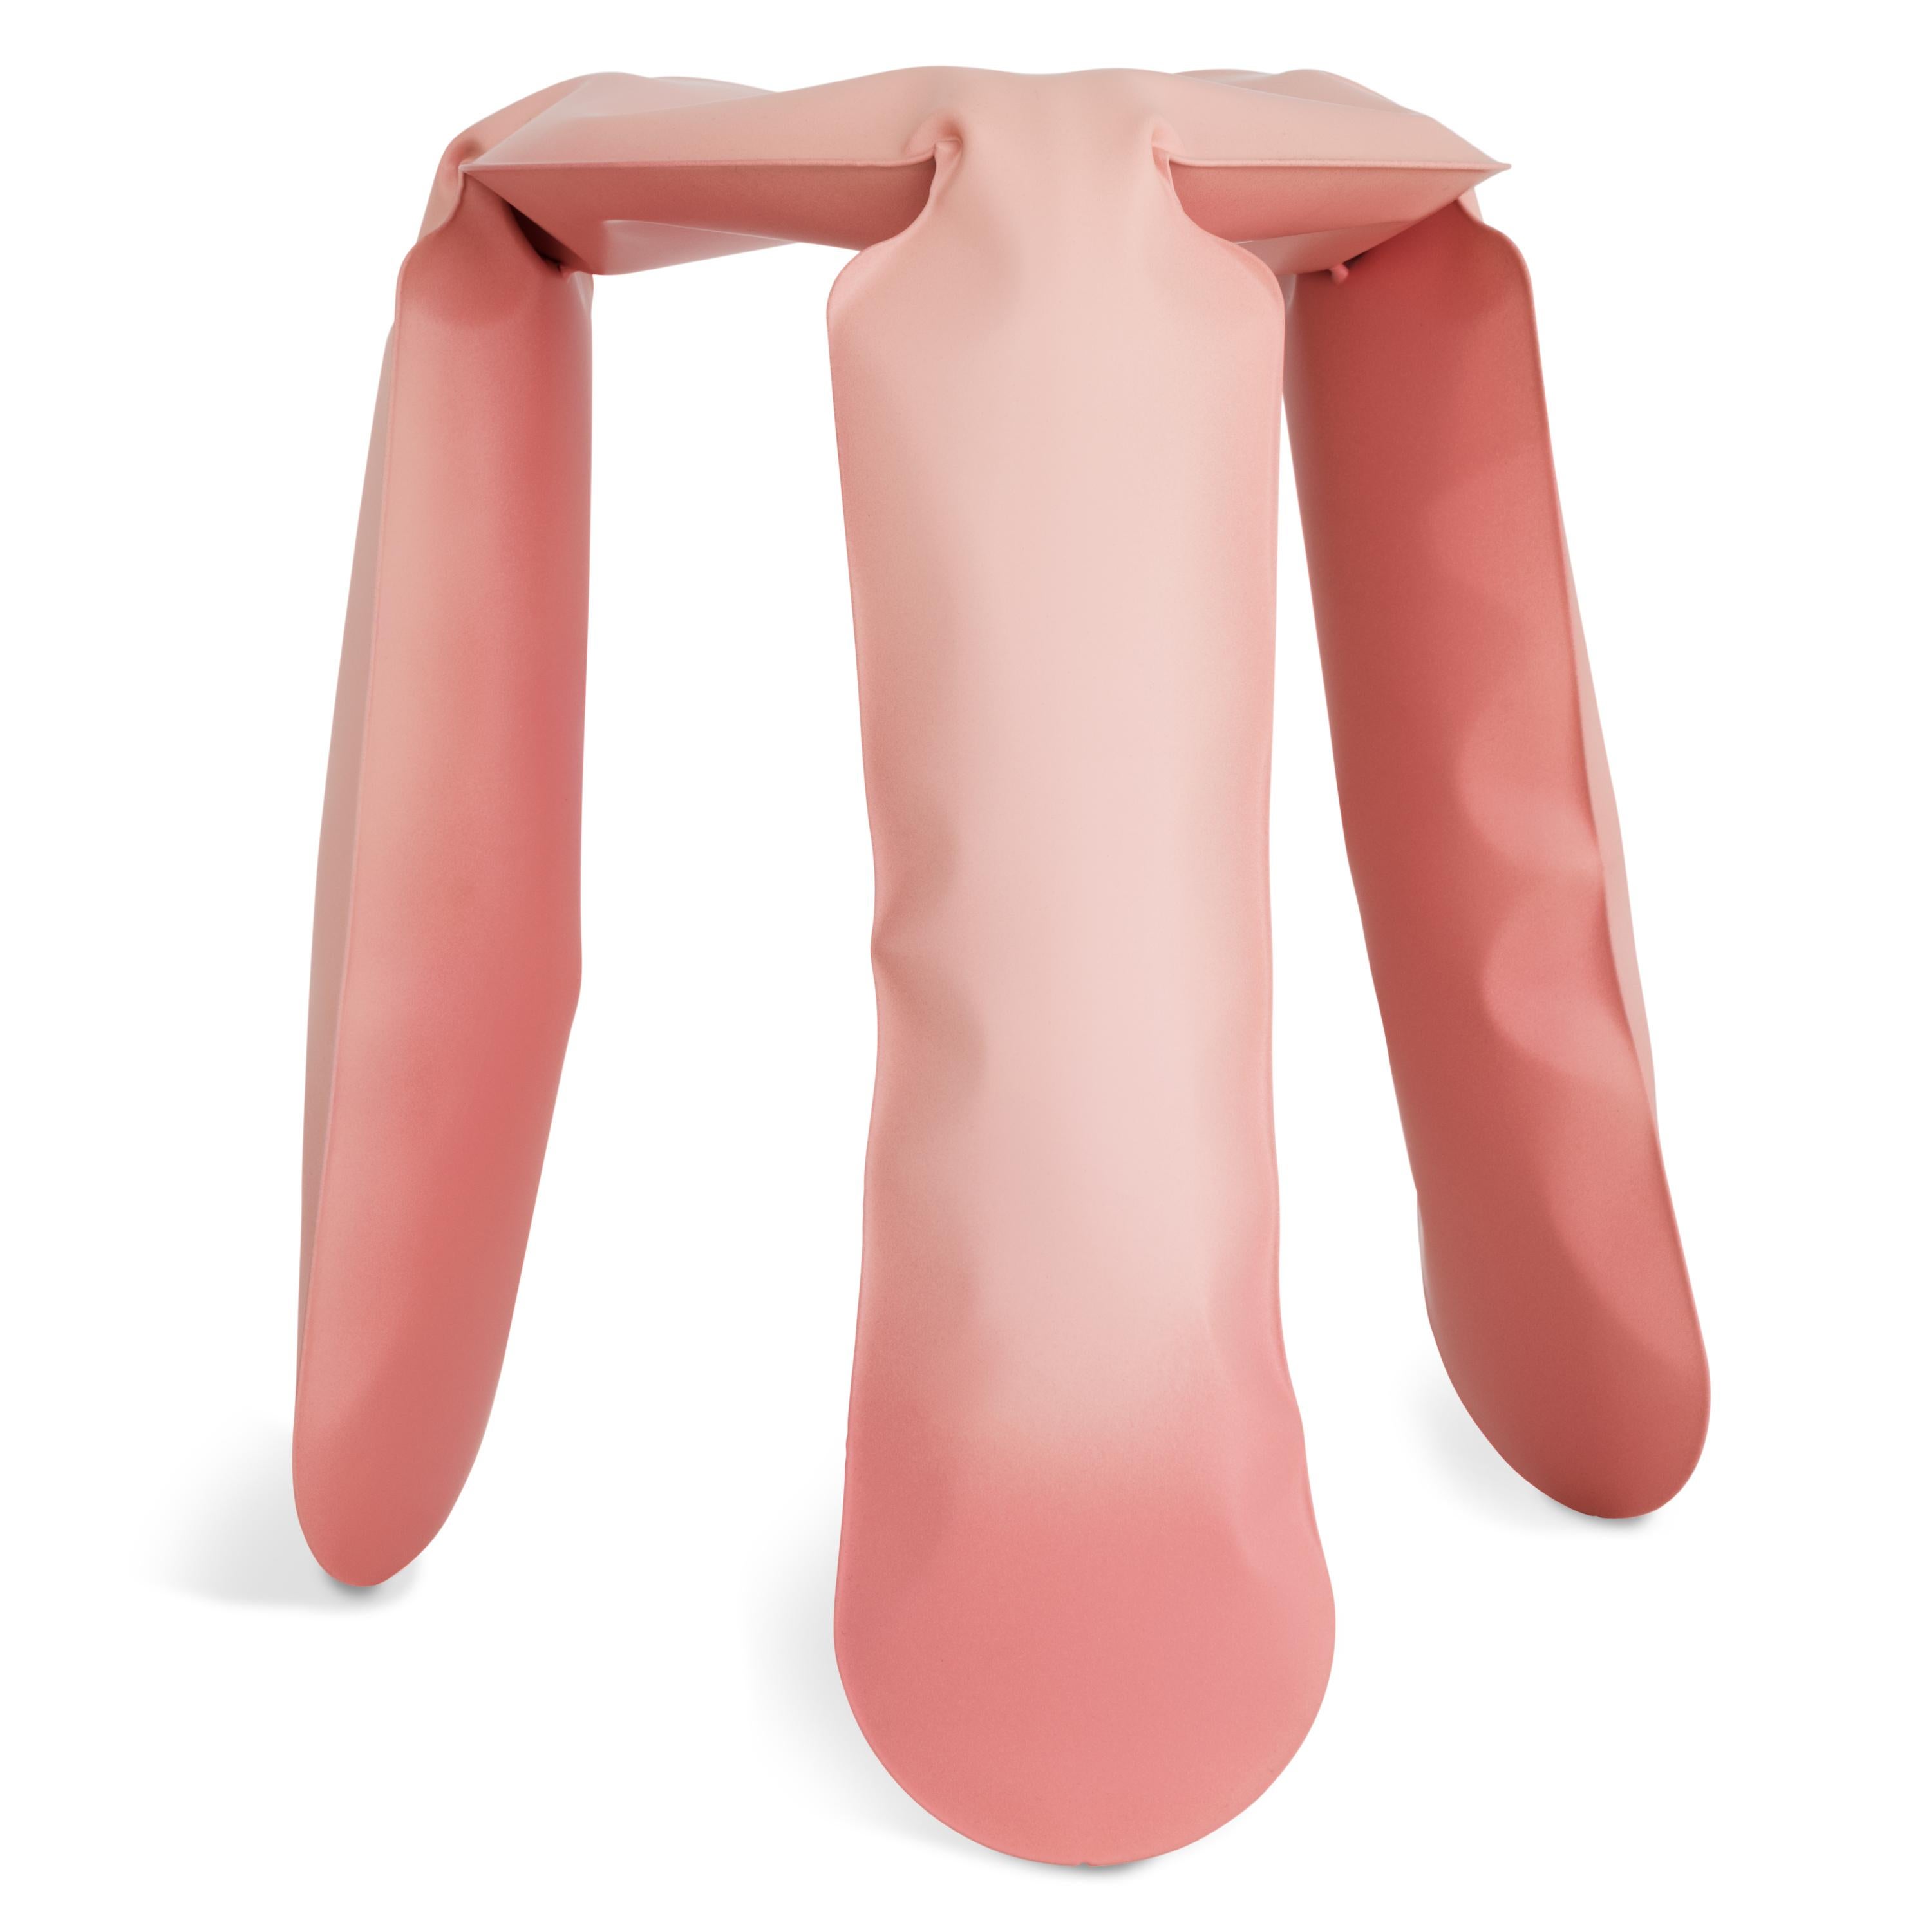 Pink Matt Plopp Standard Cotton Candy Stool by Zieta
Dimensions: D35 x H50 cm 
Material: steel
Available finishes: Also available in other sizes and colours.Please contact us.

Soft steel impressions
Challenging the material is one of the